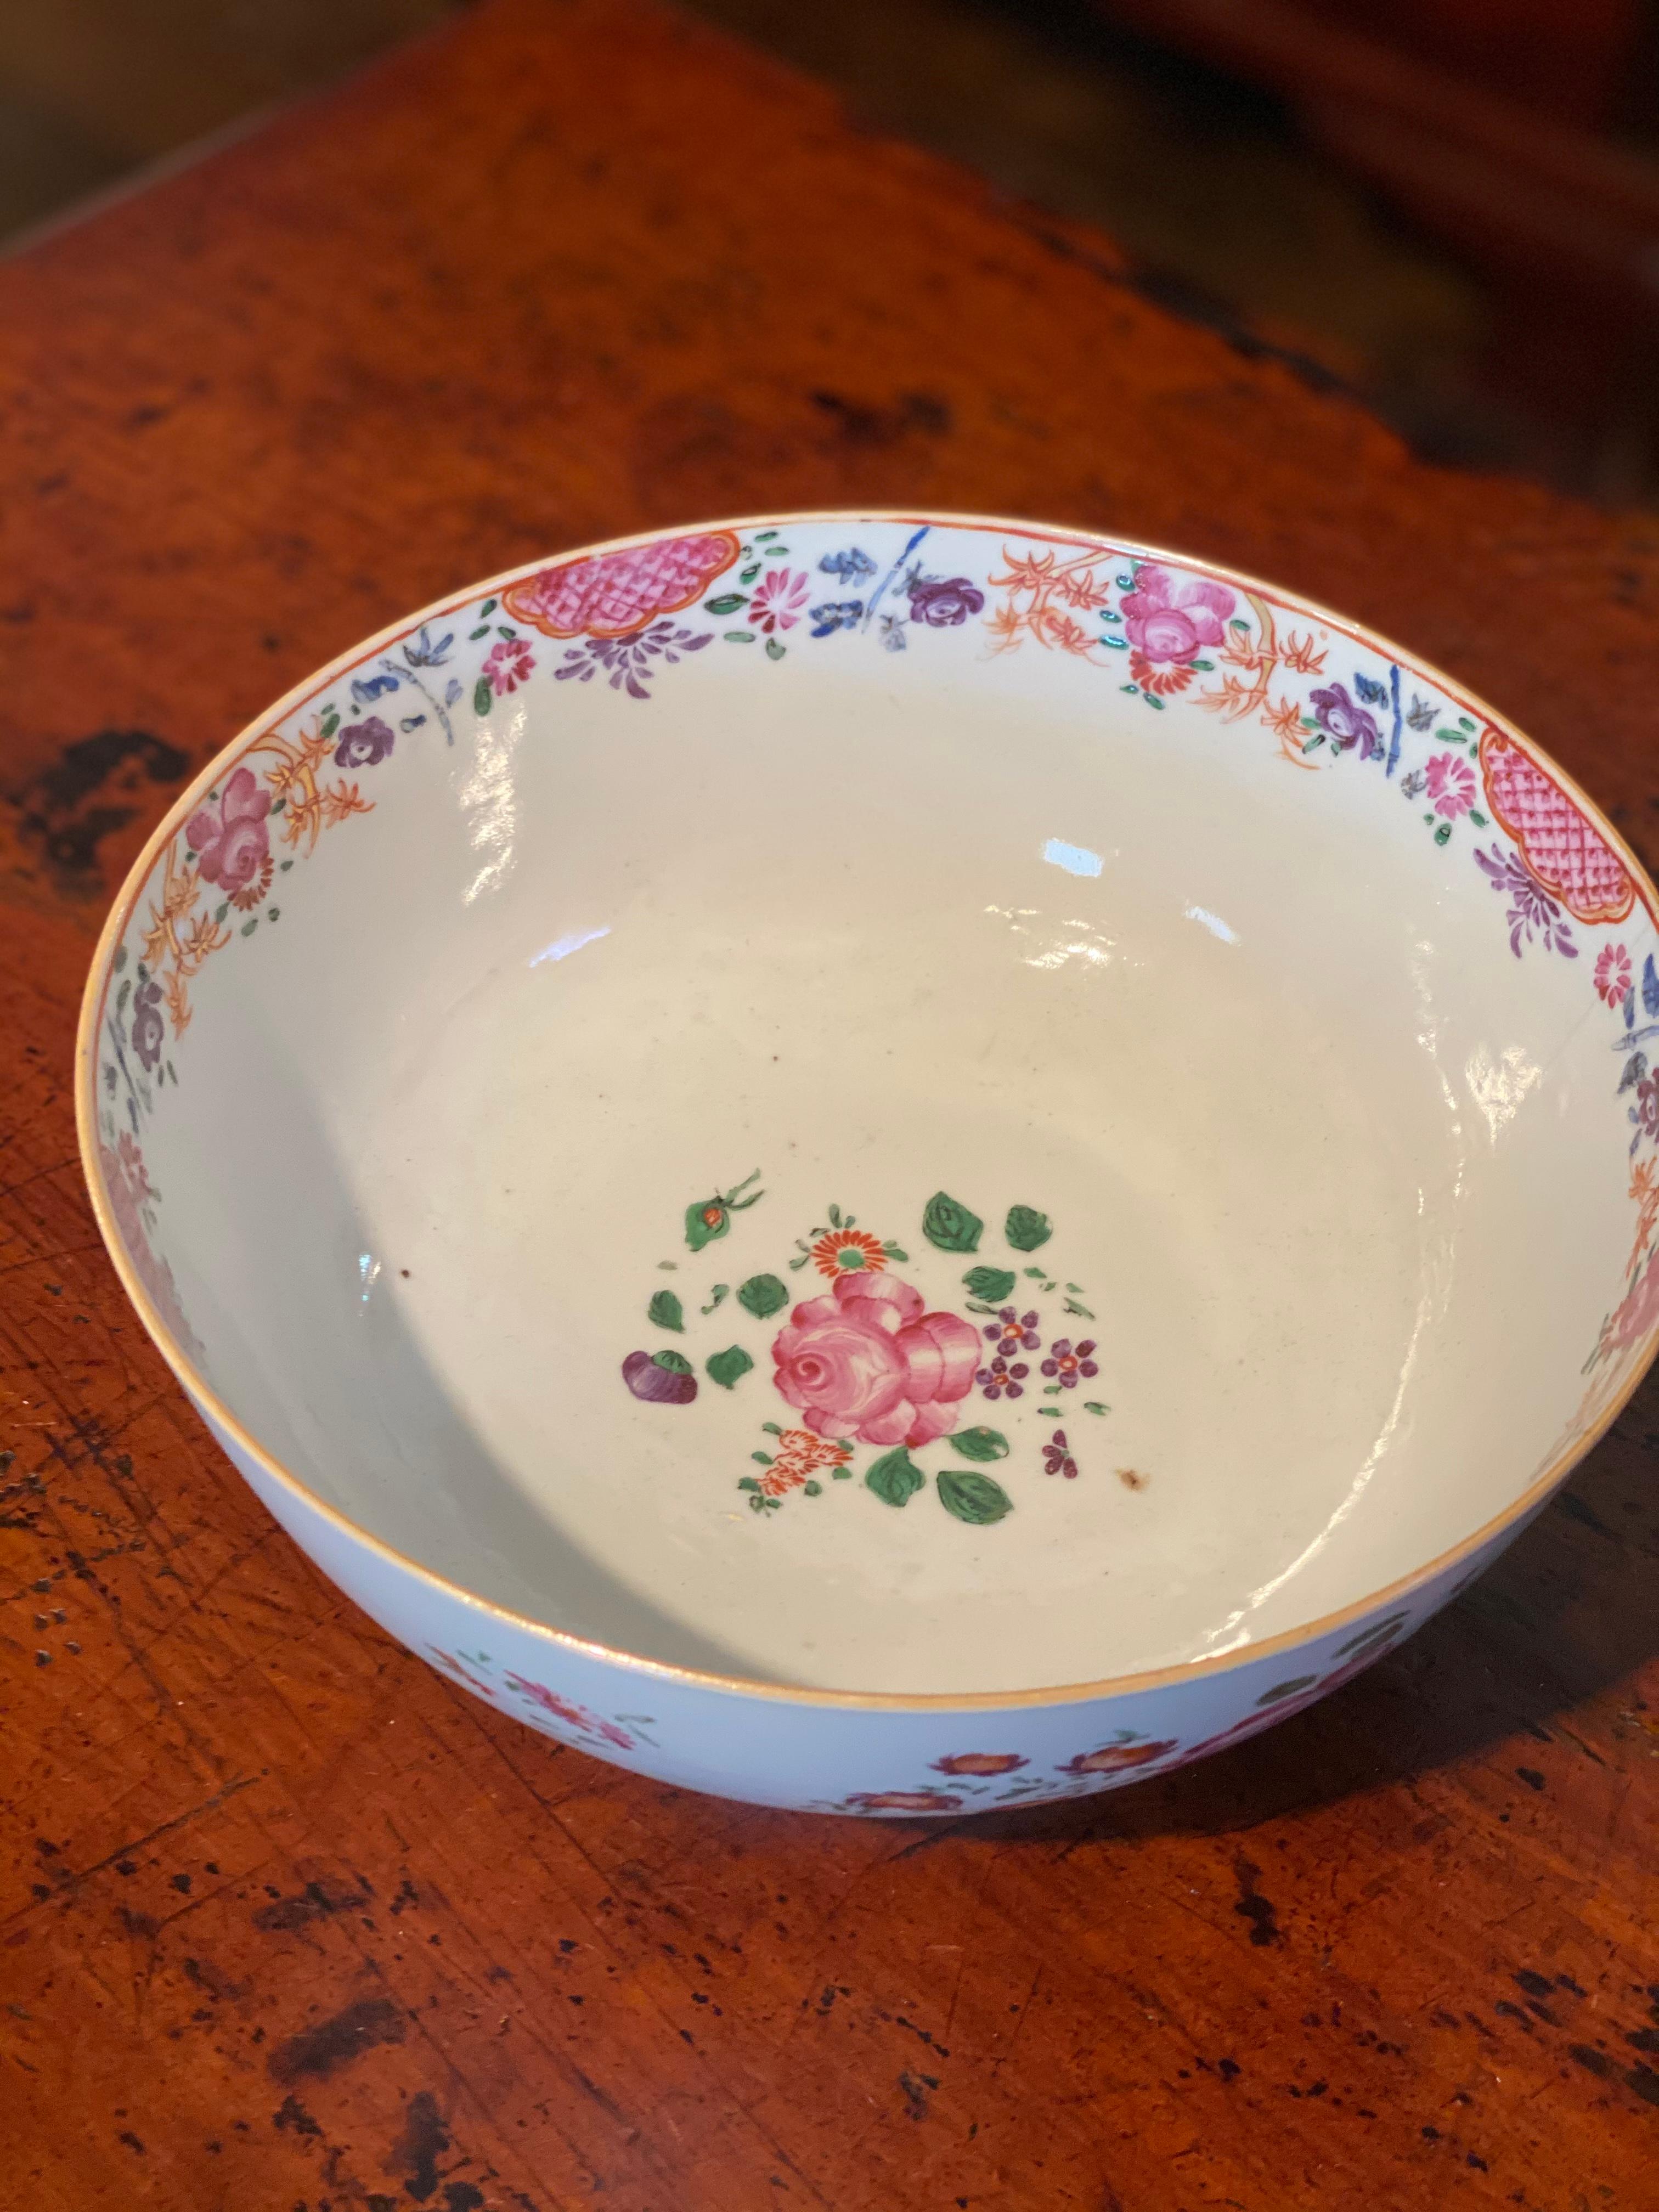 Late 18th- early 19th century Chinese export punch bowl with flowers. One hairline crack seen, but structurally sound and great condition otherwise.